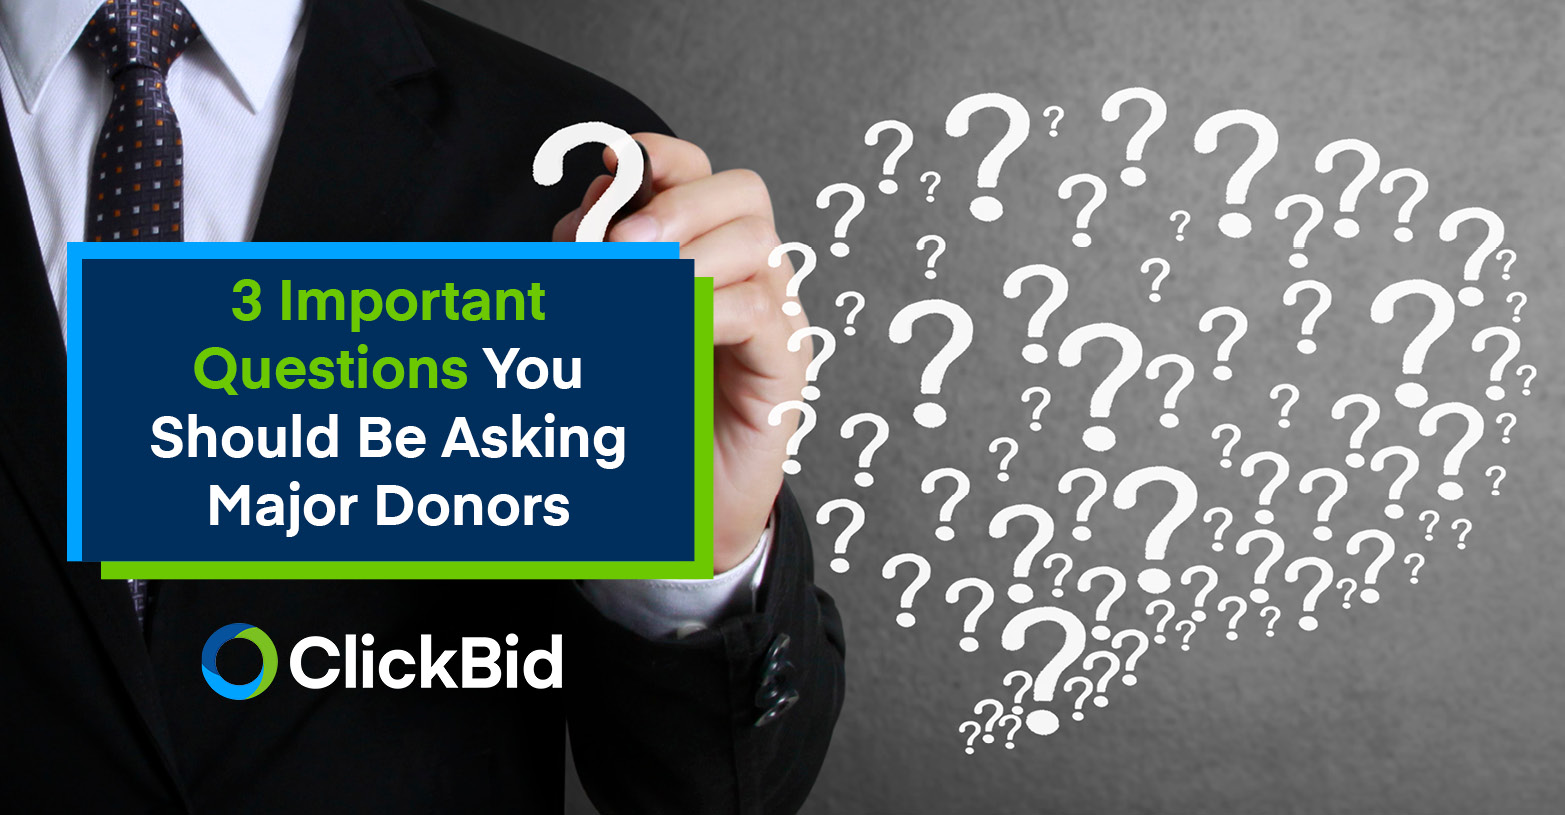 3 Important Questions You Should Be Asking Major Donors